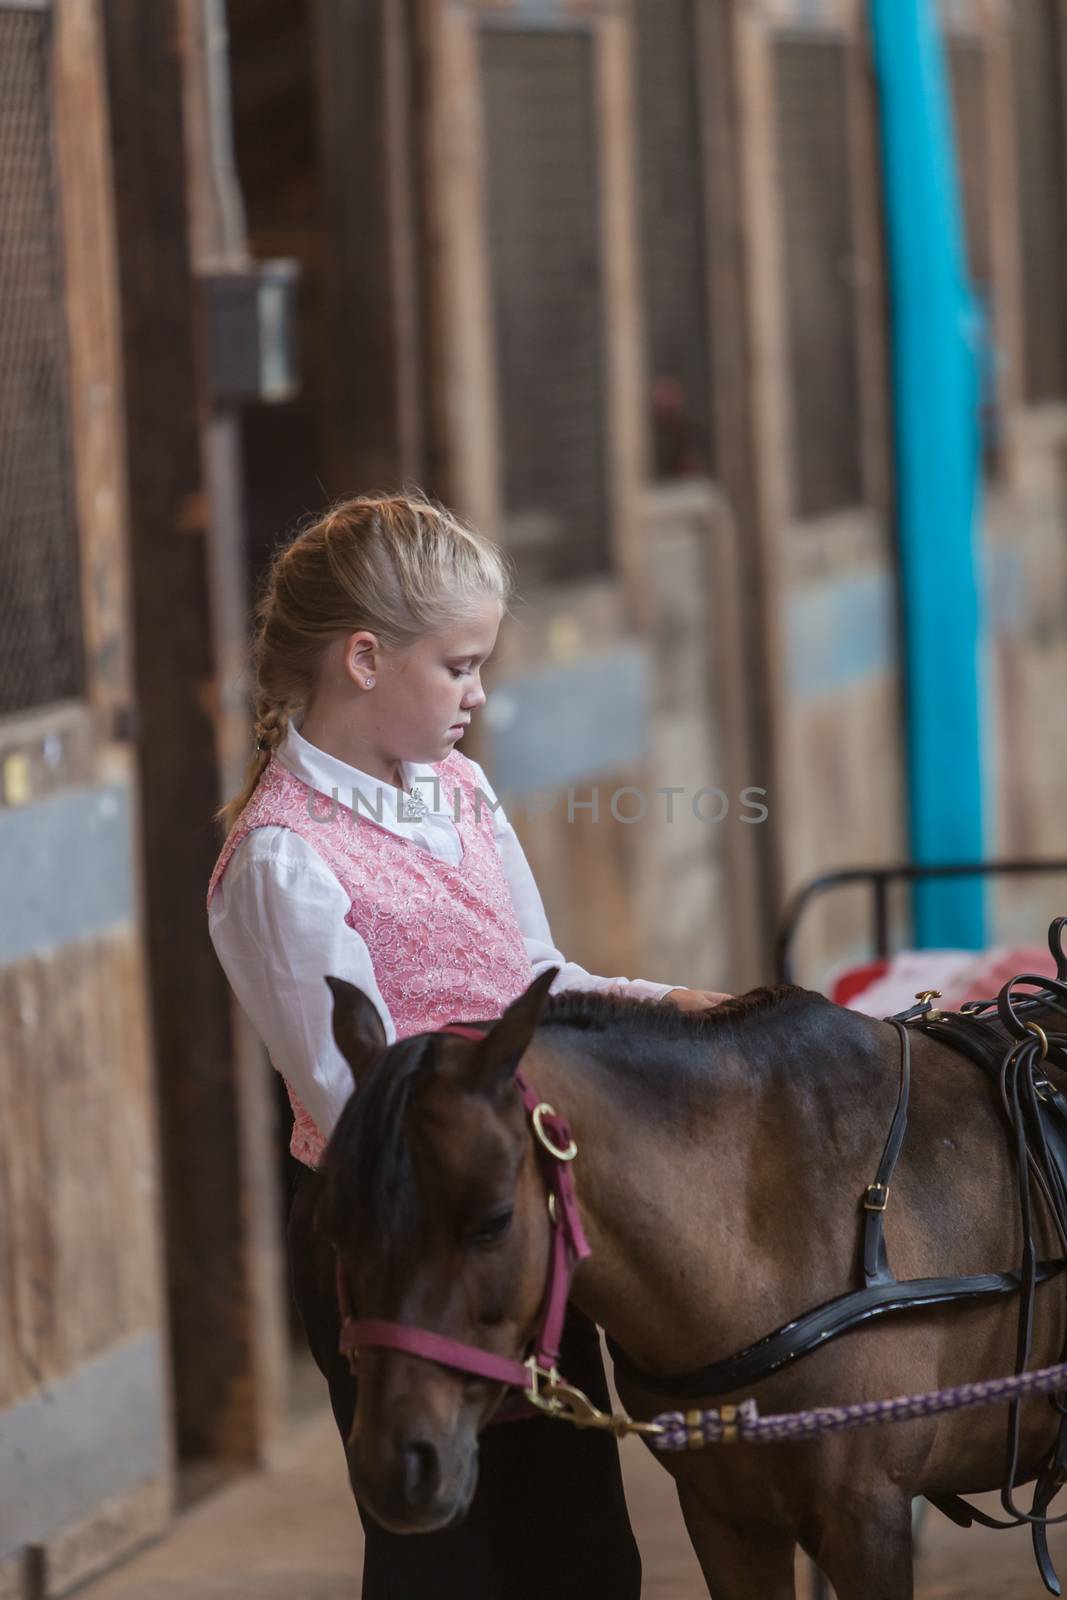 DES MOINES, IA /USA - AUGUST 10: Unidentified girl with miniature horse at Iowa State Fair on August 10, 2014 in Des Moines, Iowa, USA.